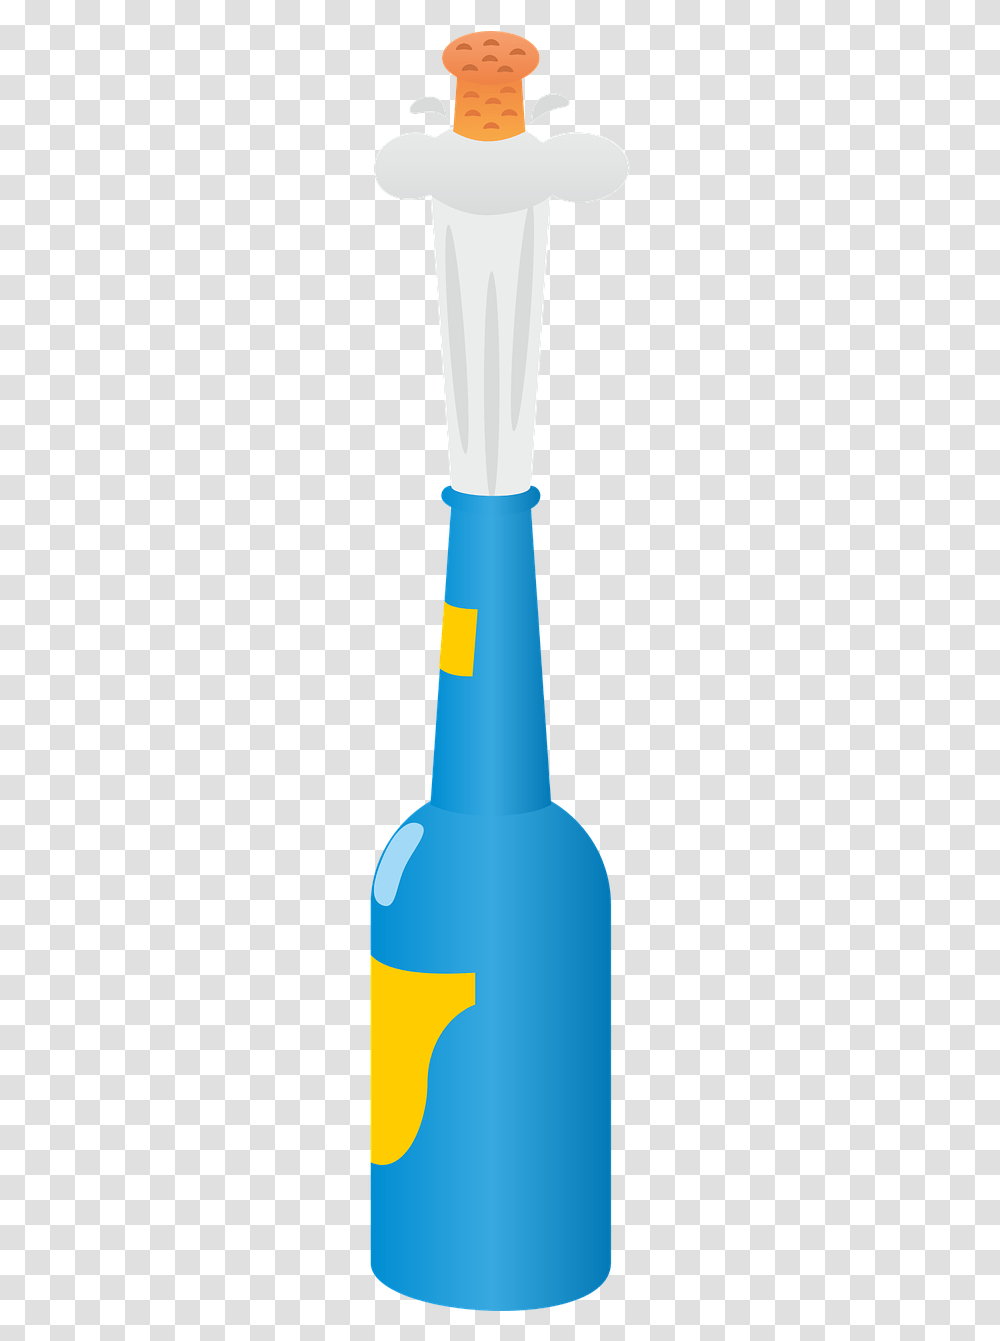 Bottle Champagne Bottle Of Sparkling Wine Free Picture Champagne, Architecture, Building, Cutlery, Spoon Transparent Png